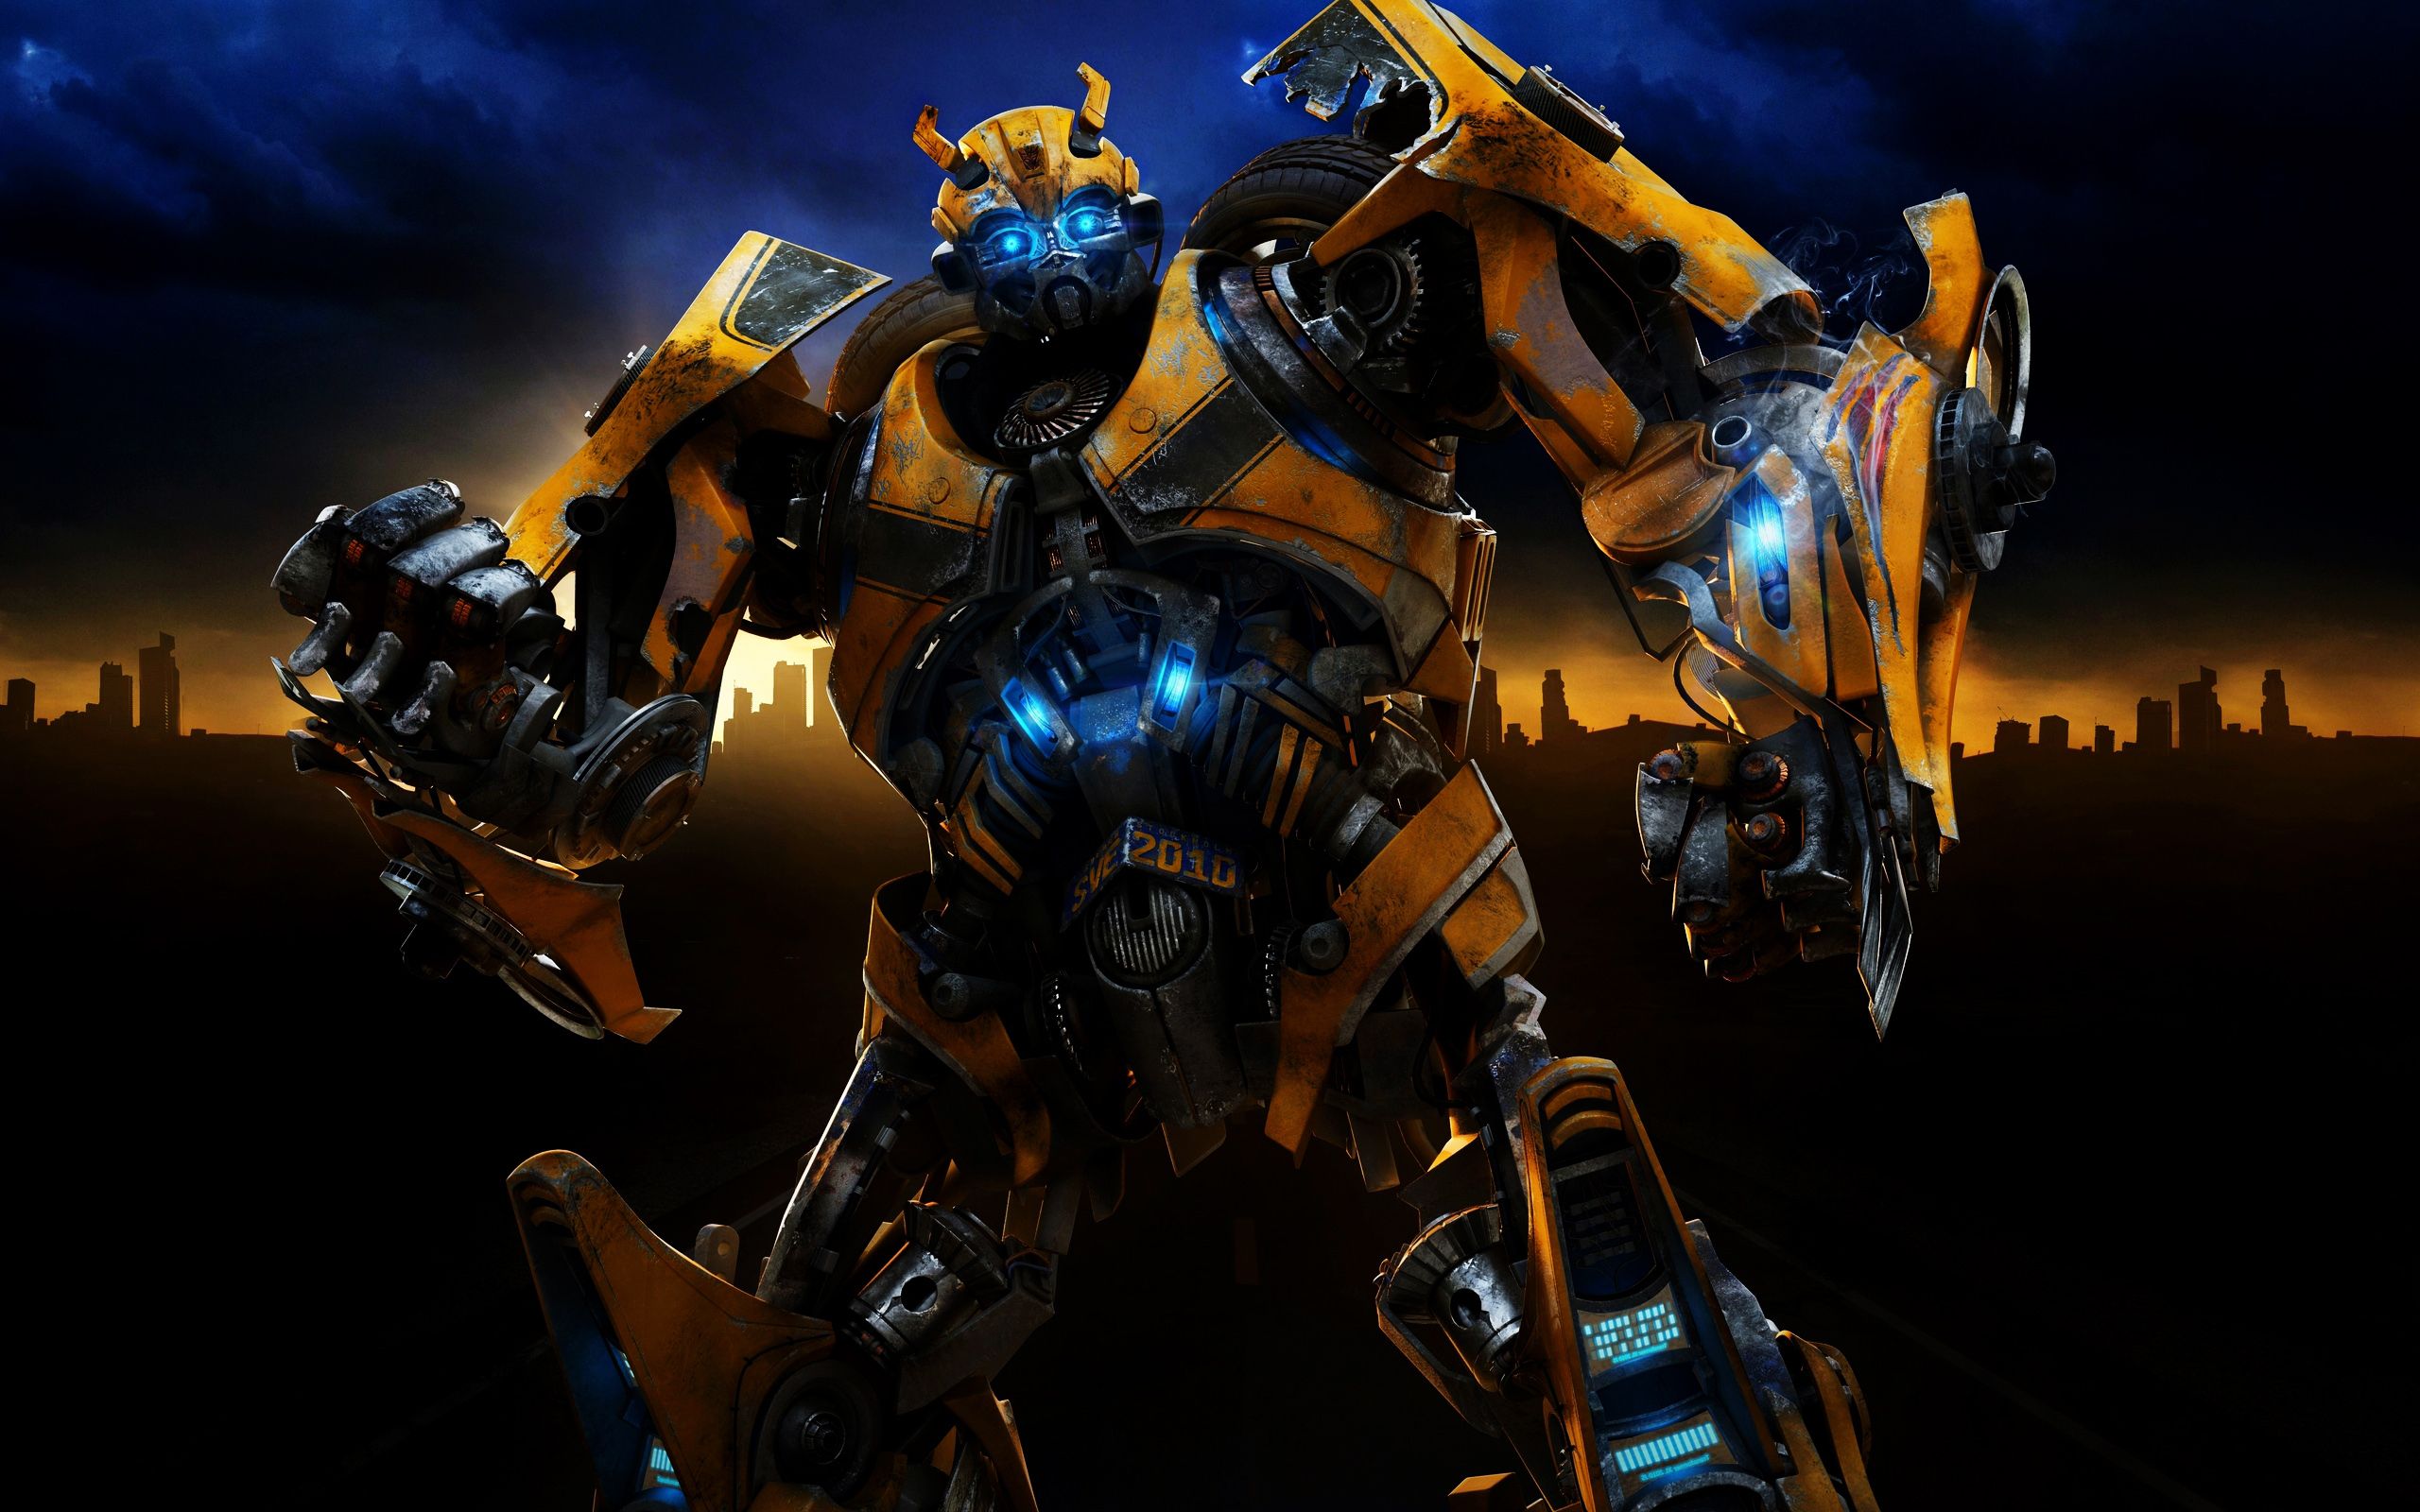 HD Wallpapers Of Bumblebee Autobot In Transformers Movie - WallpaperCare